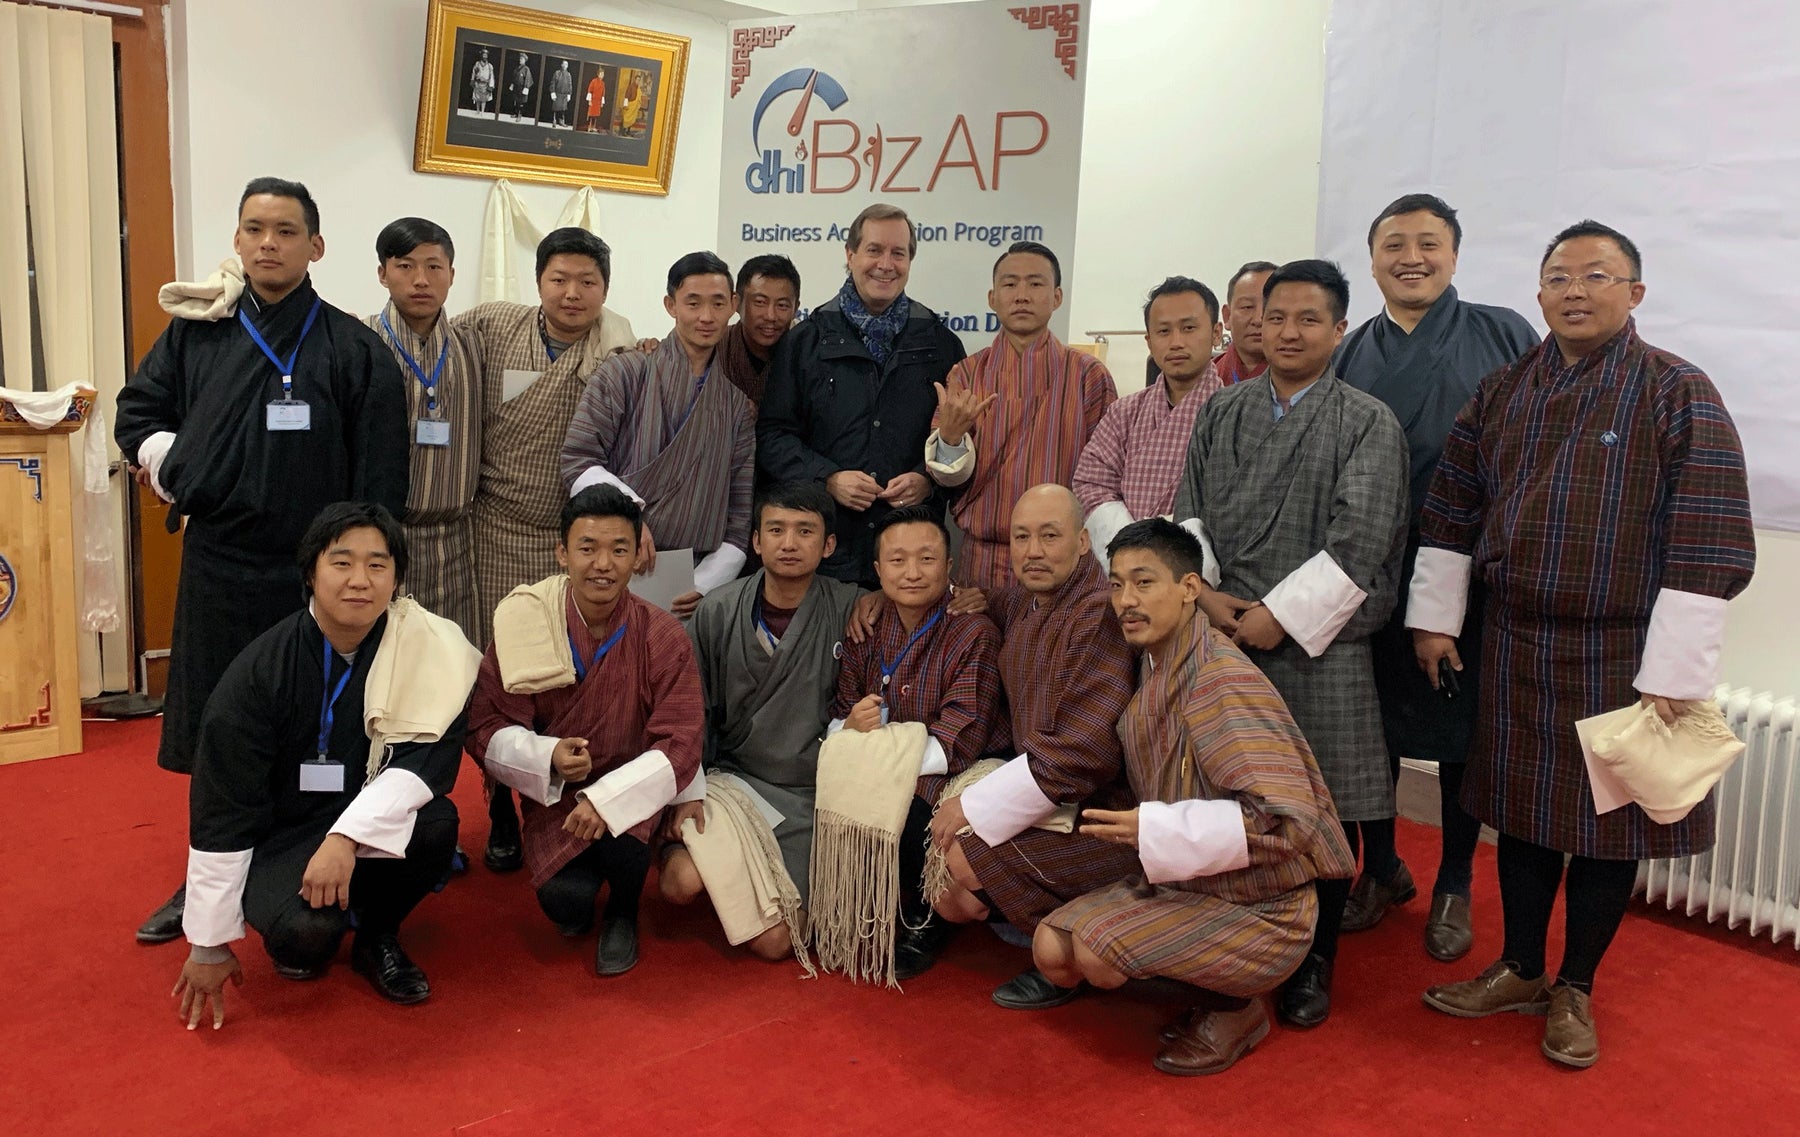 Top business acceleration training program in Bhutan is going to support entrepreneurs